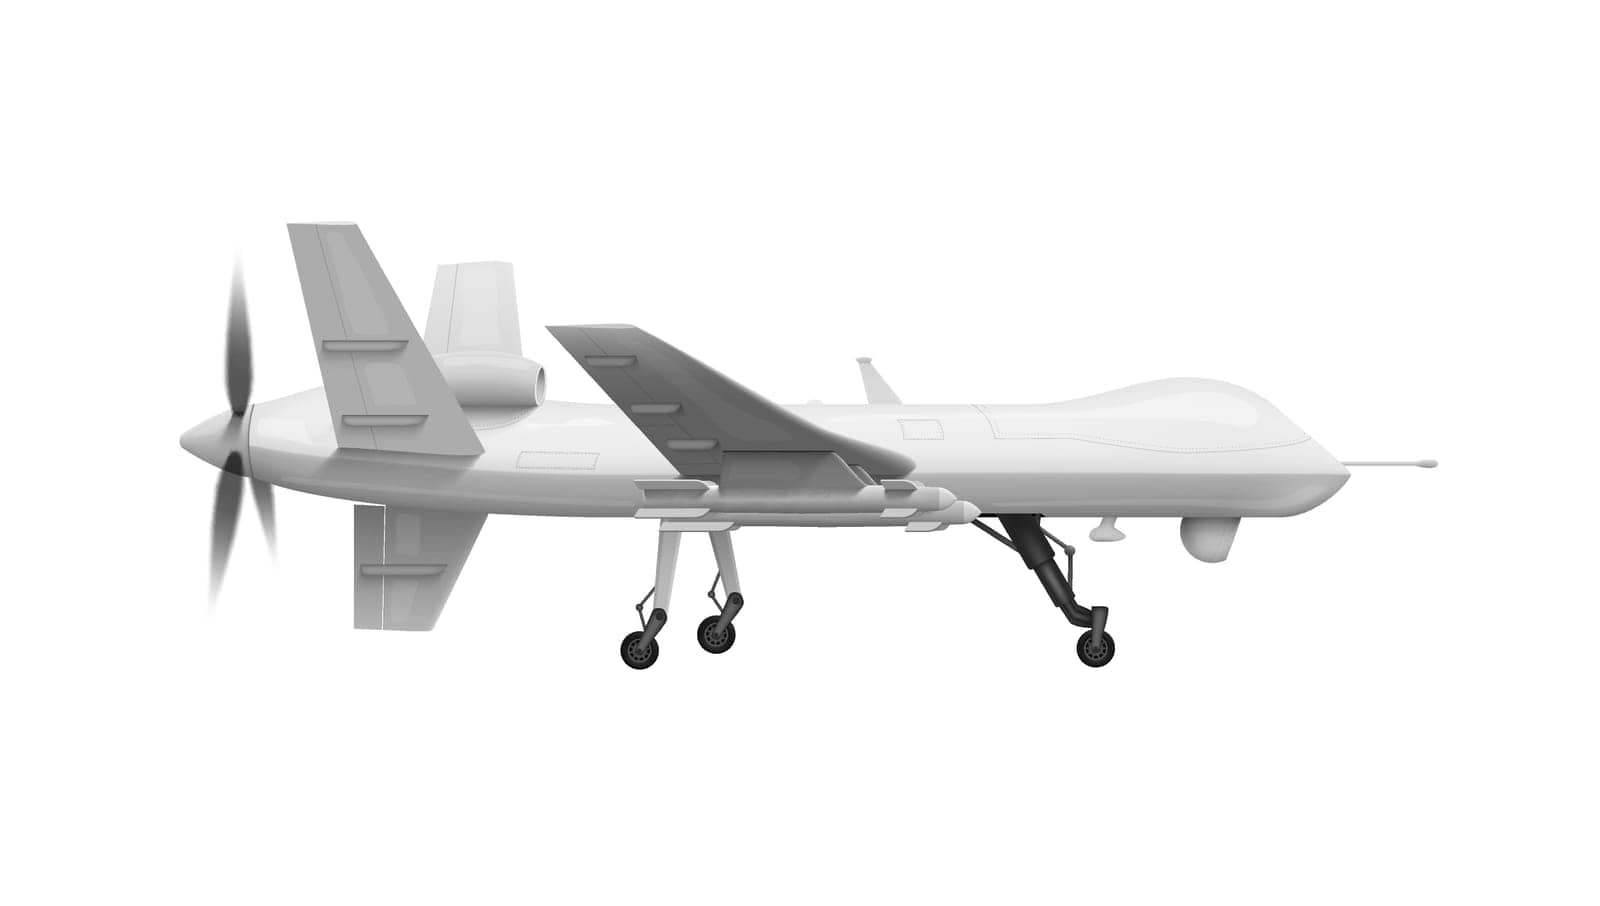 Military Drone With Rockets Missiles On White by VectorThings